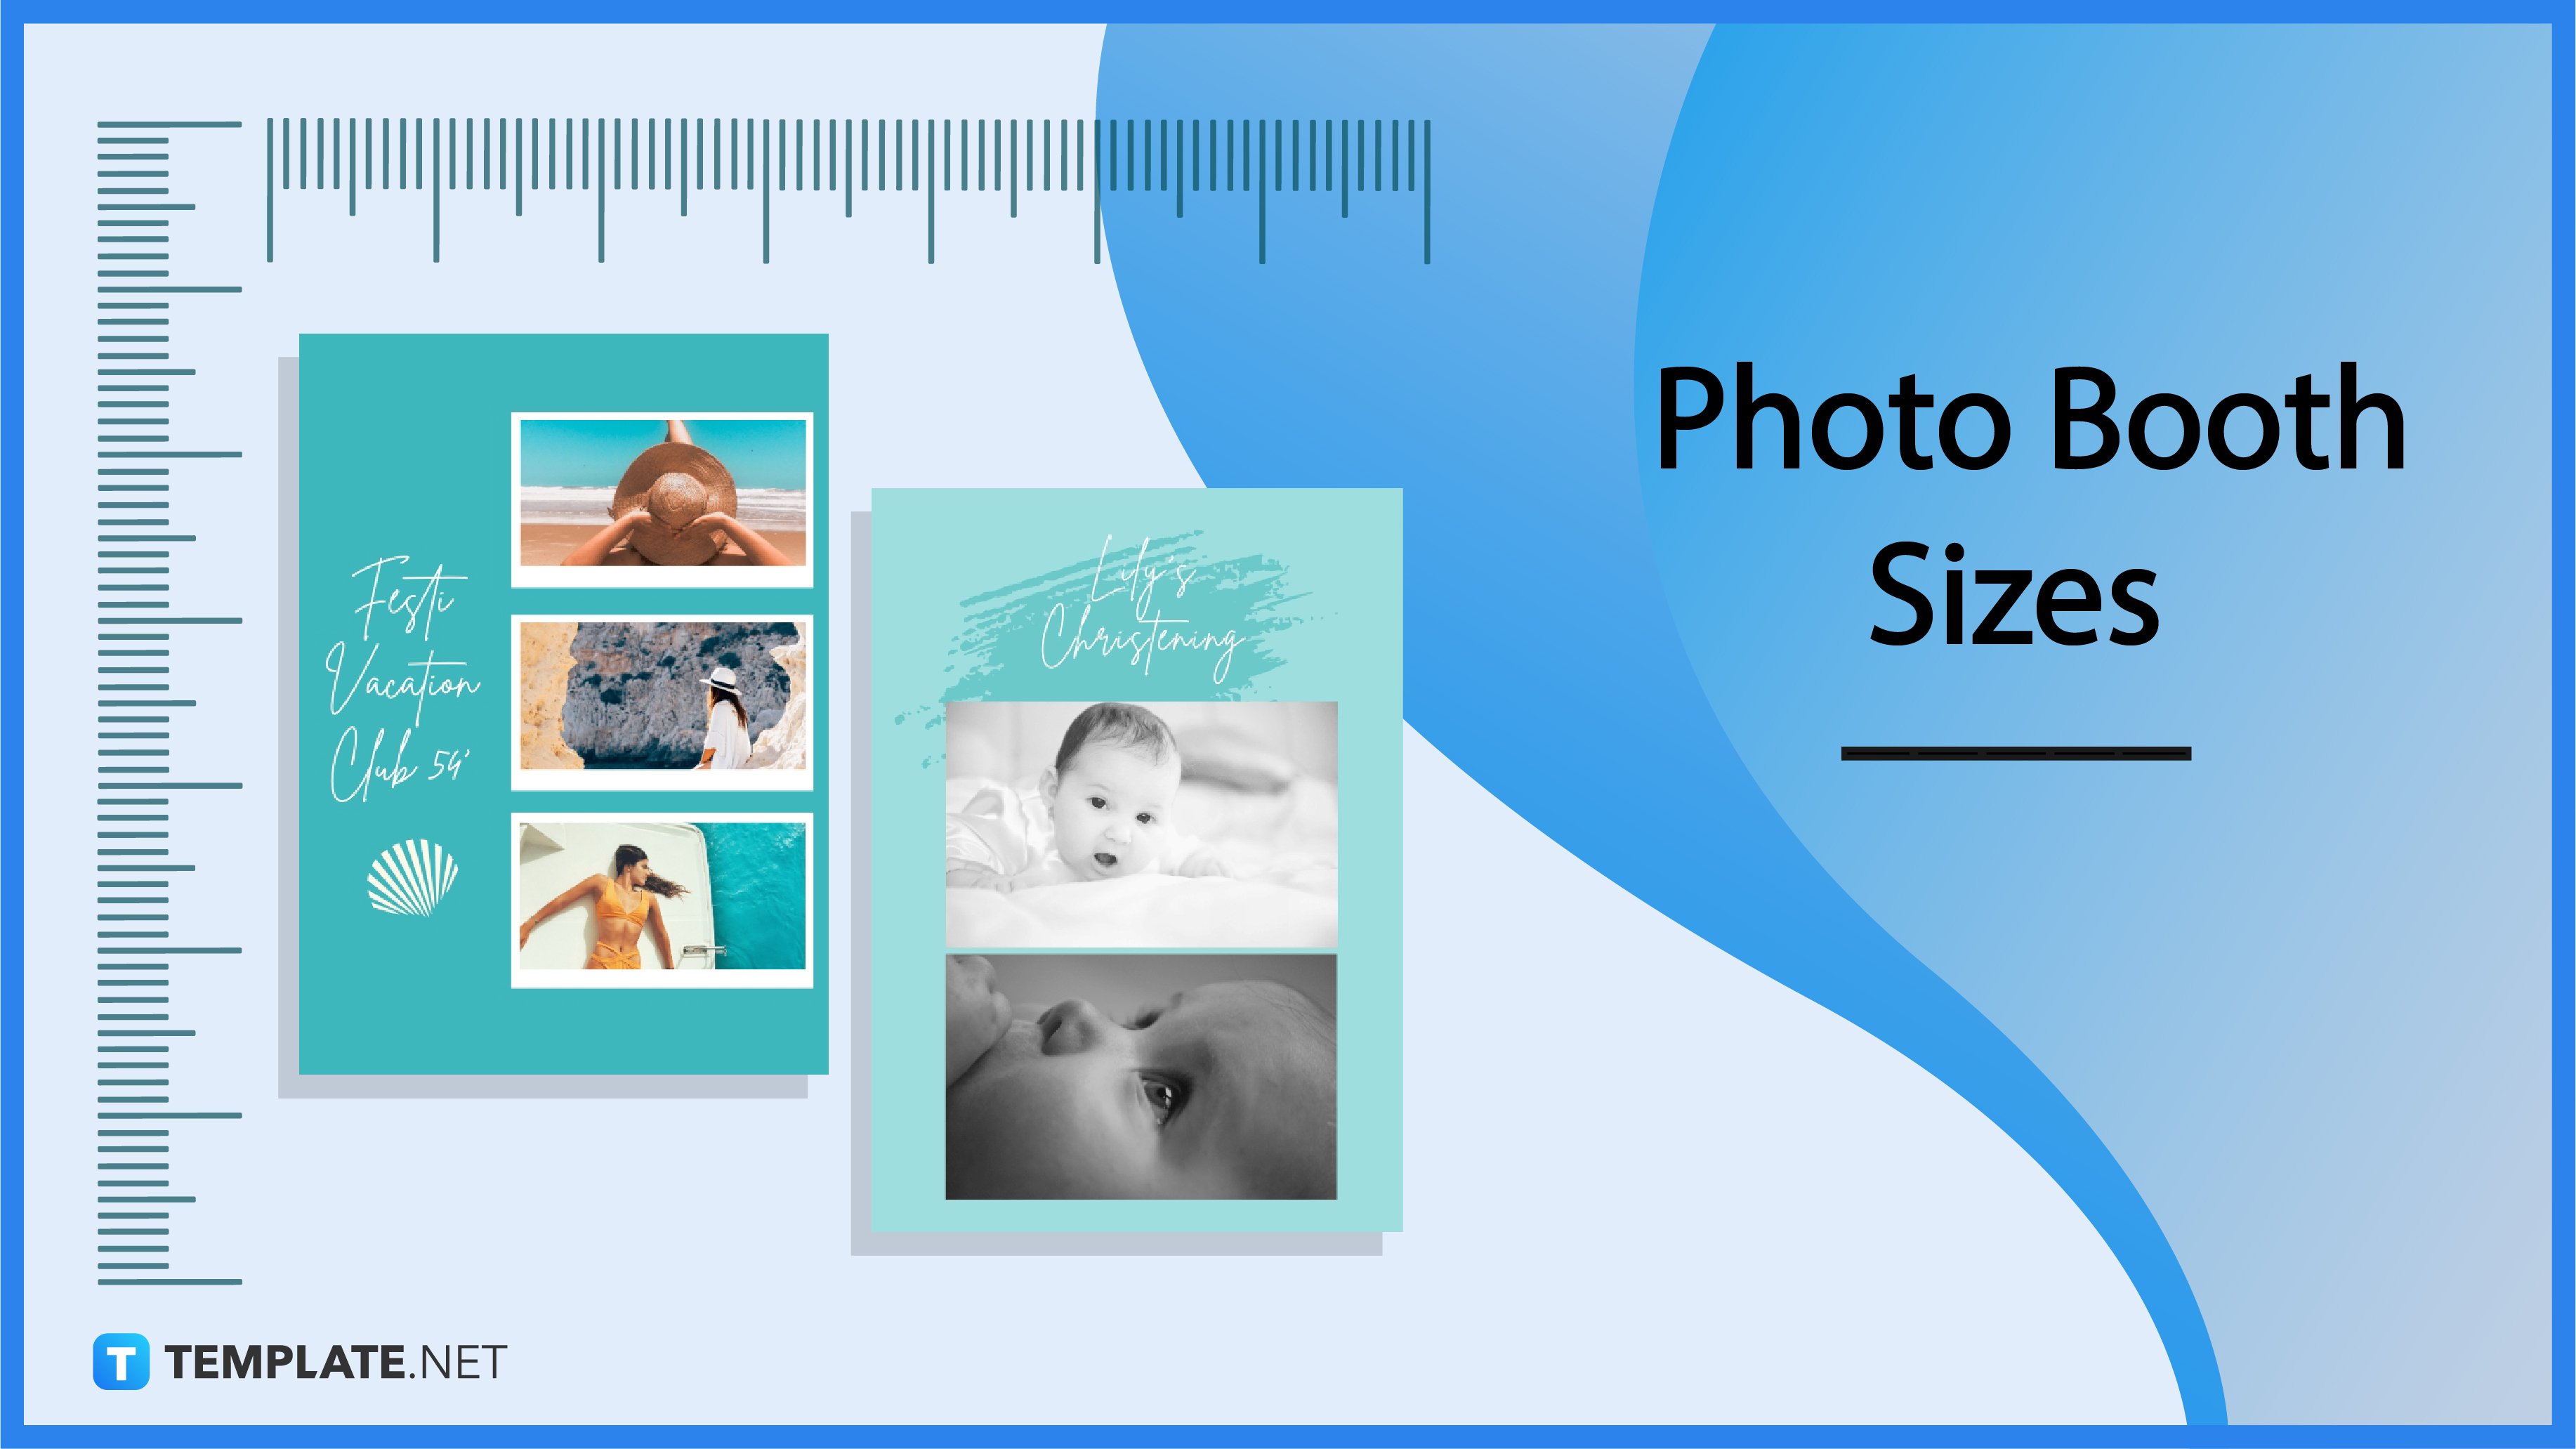 Getting Started with a Custom Photo Booth Online